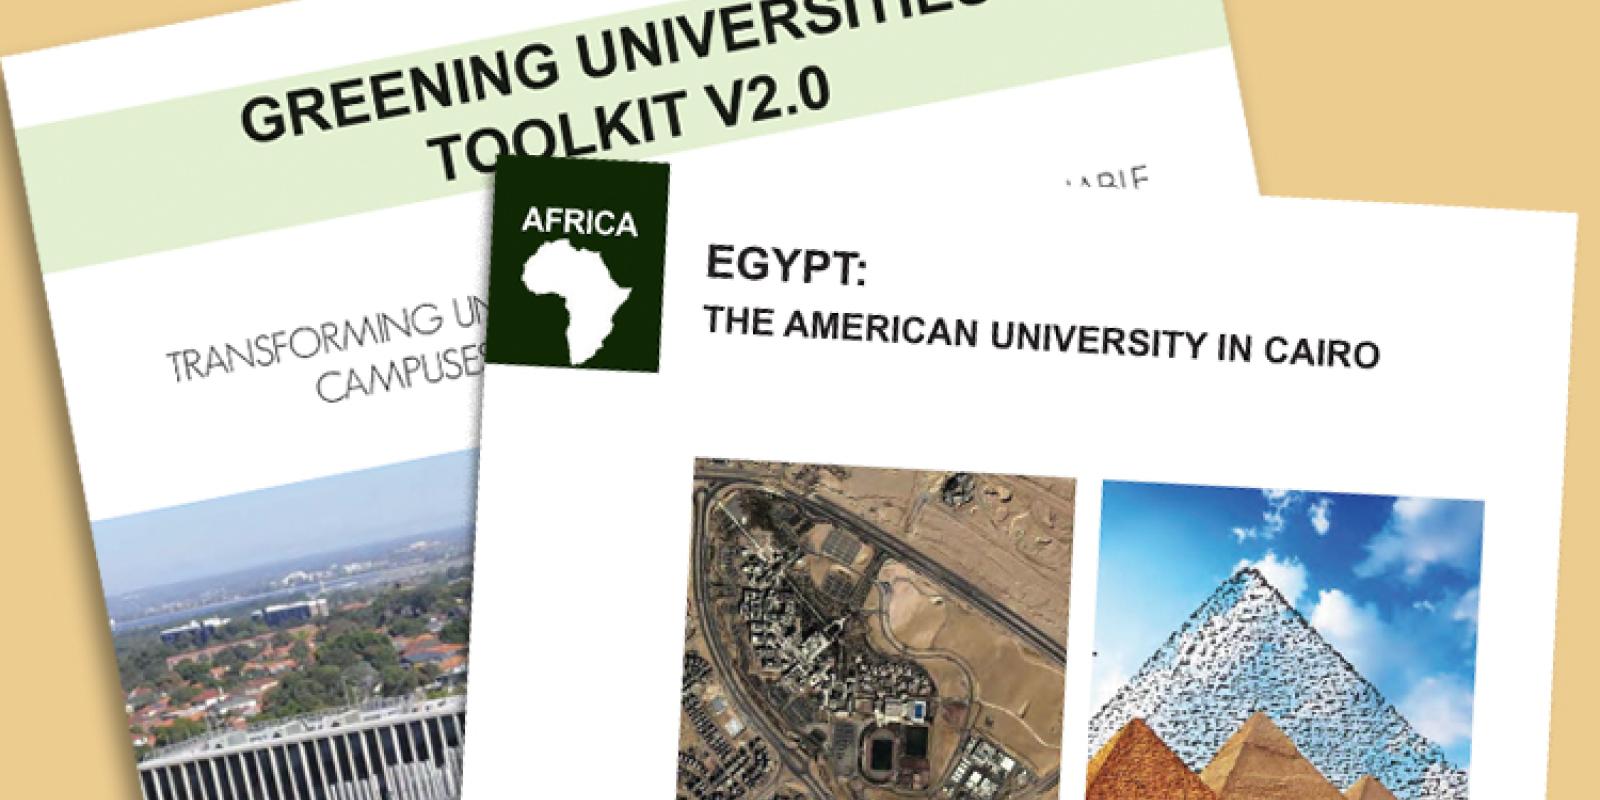 AUC is the only university in the region featured in the UNEP's Greening Universities Toolkit